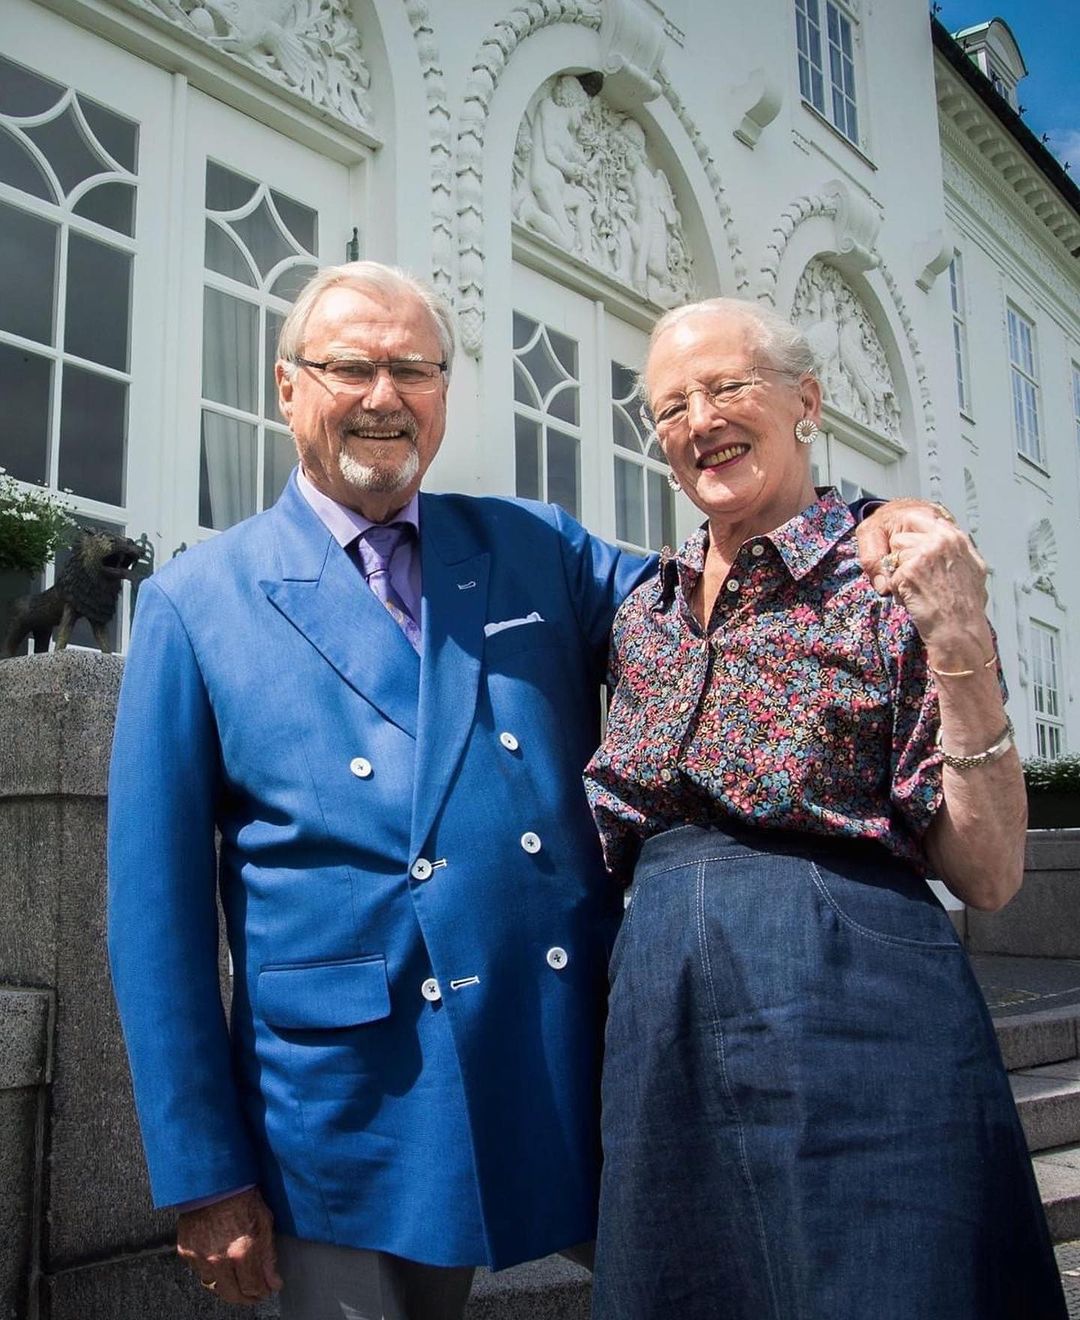 The late Prince Henrik with Queen Margrethe II